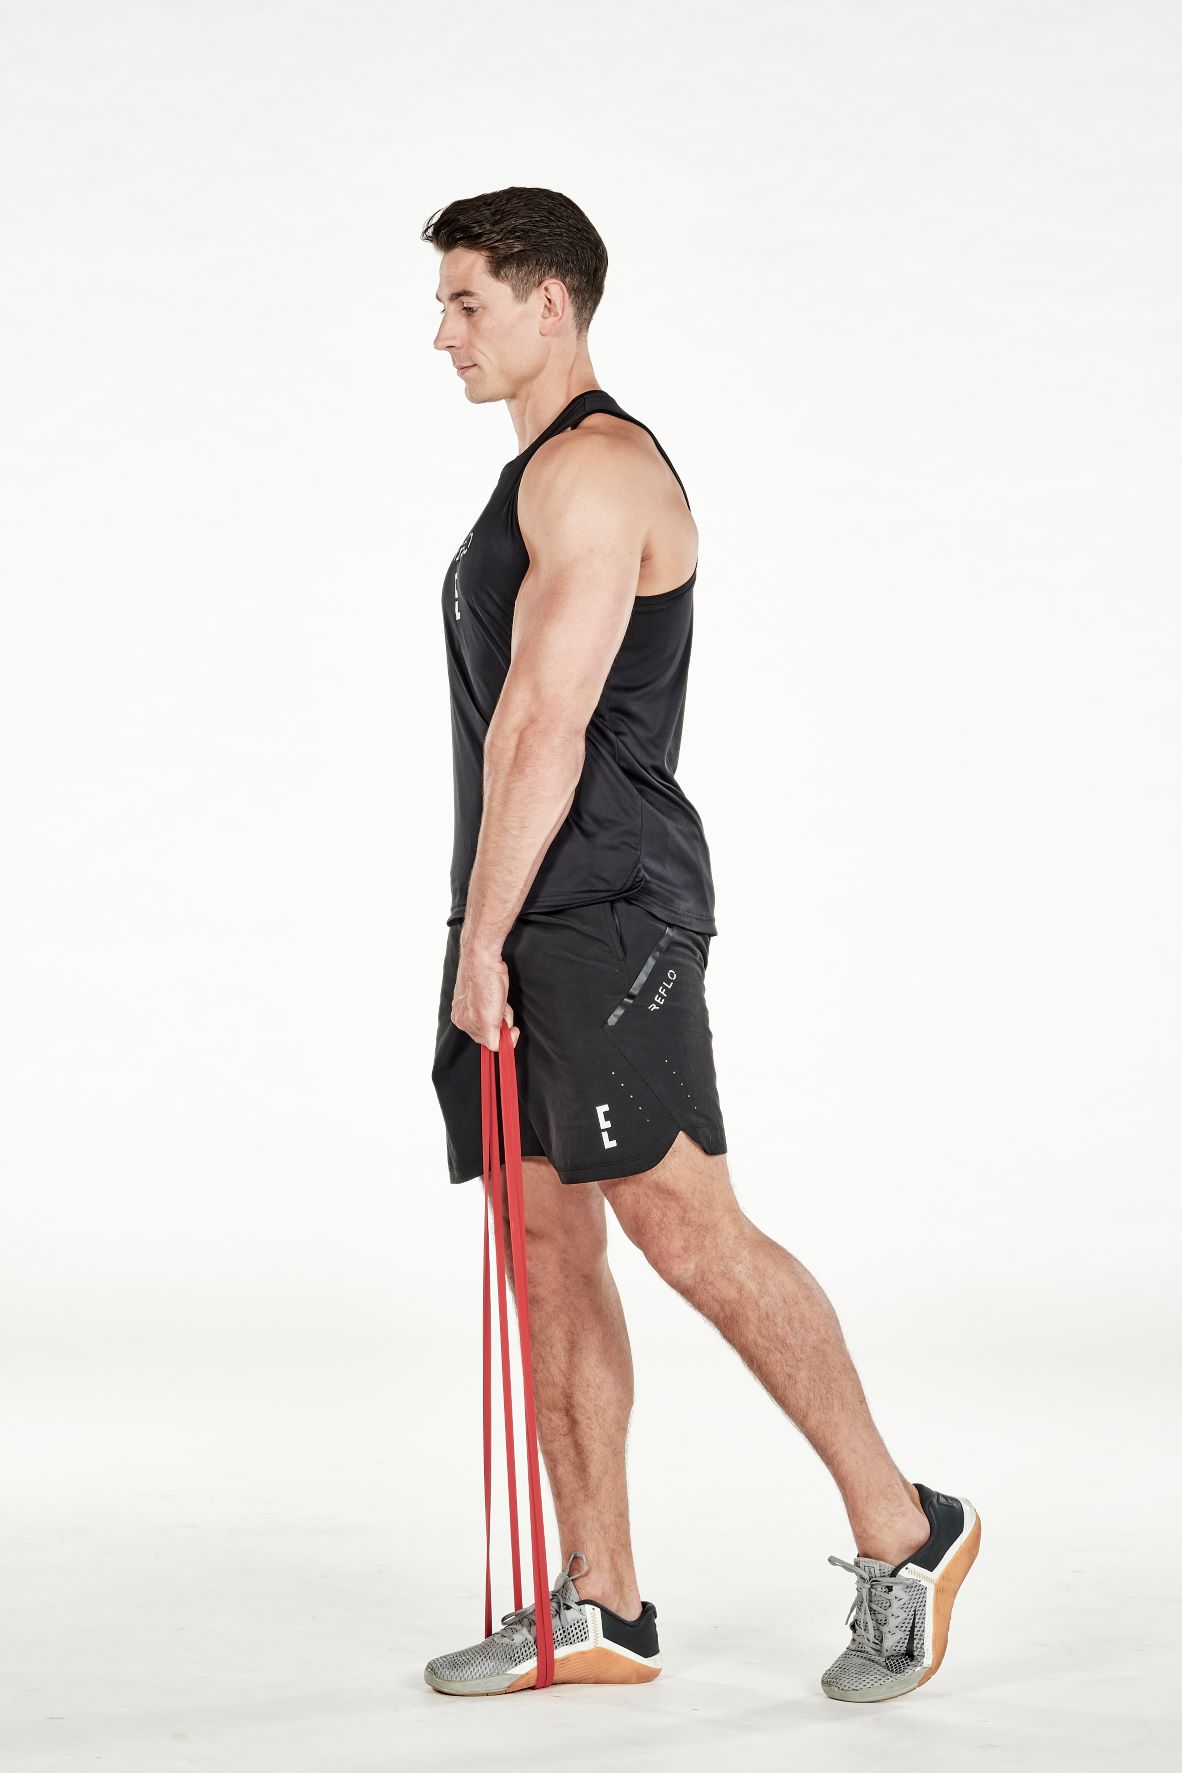 man demonstrating step two of resistance band single-leg romanian deadlift; he stands straight, holding a band which is being held under his foot; his other leg is relaxed and positioned behind him; he wears a black fitness vest, black shorts and trainers